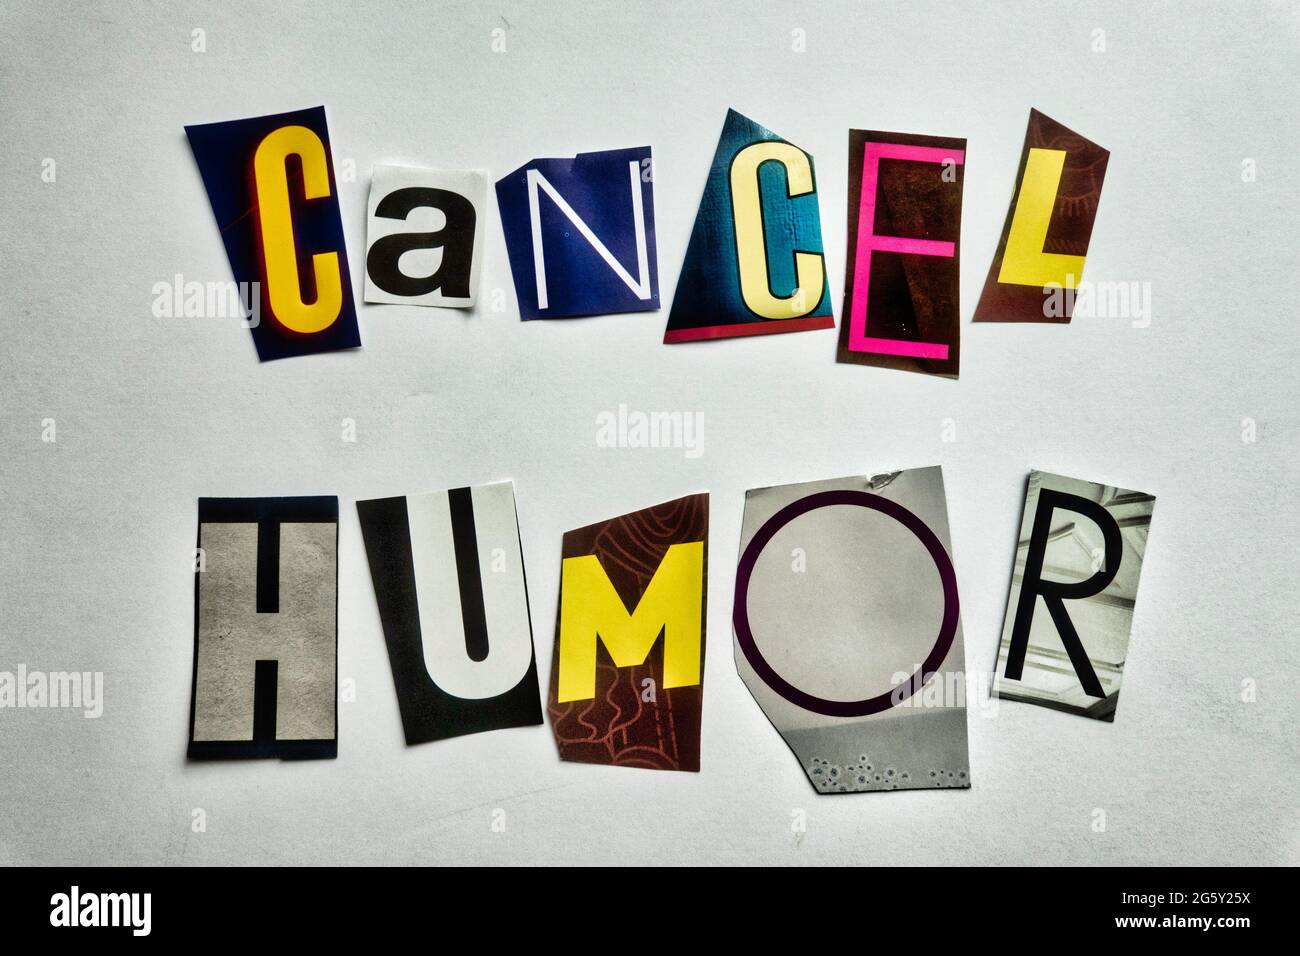 The words 'Cancel Humor' using cut-out paper letters in the ransom note effect typography, USA Stock Photo